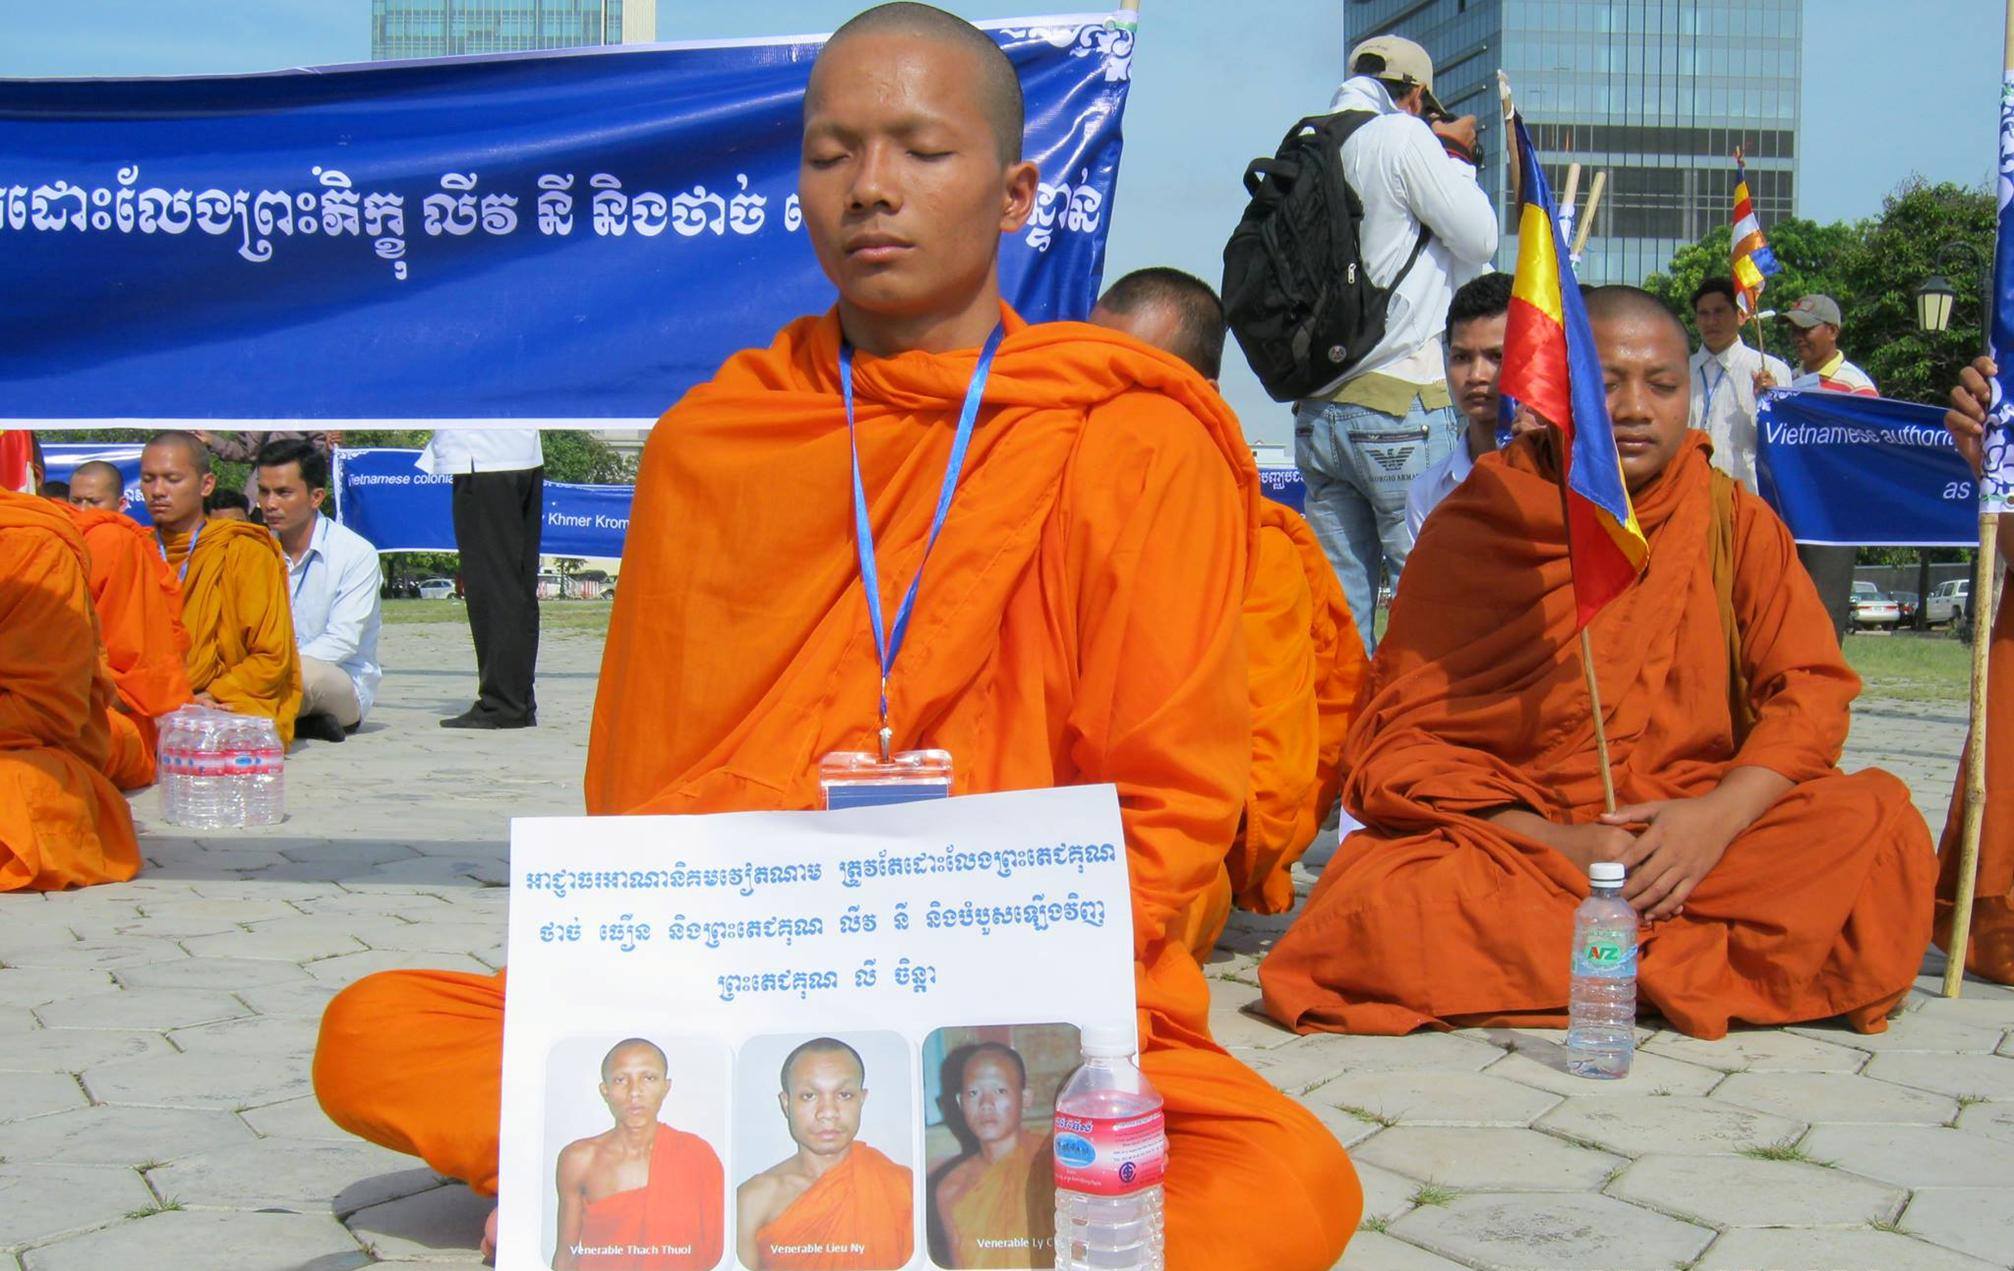 Khmer Krom: US Urge Vietnam to Respect Religious Freedoms, Including Those of Buddhist Monks